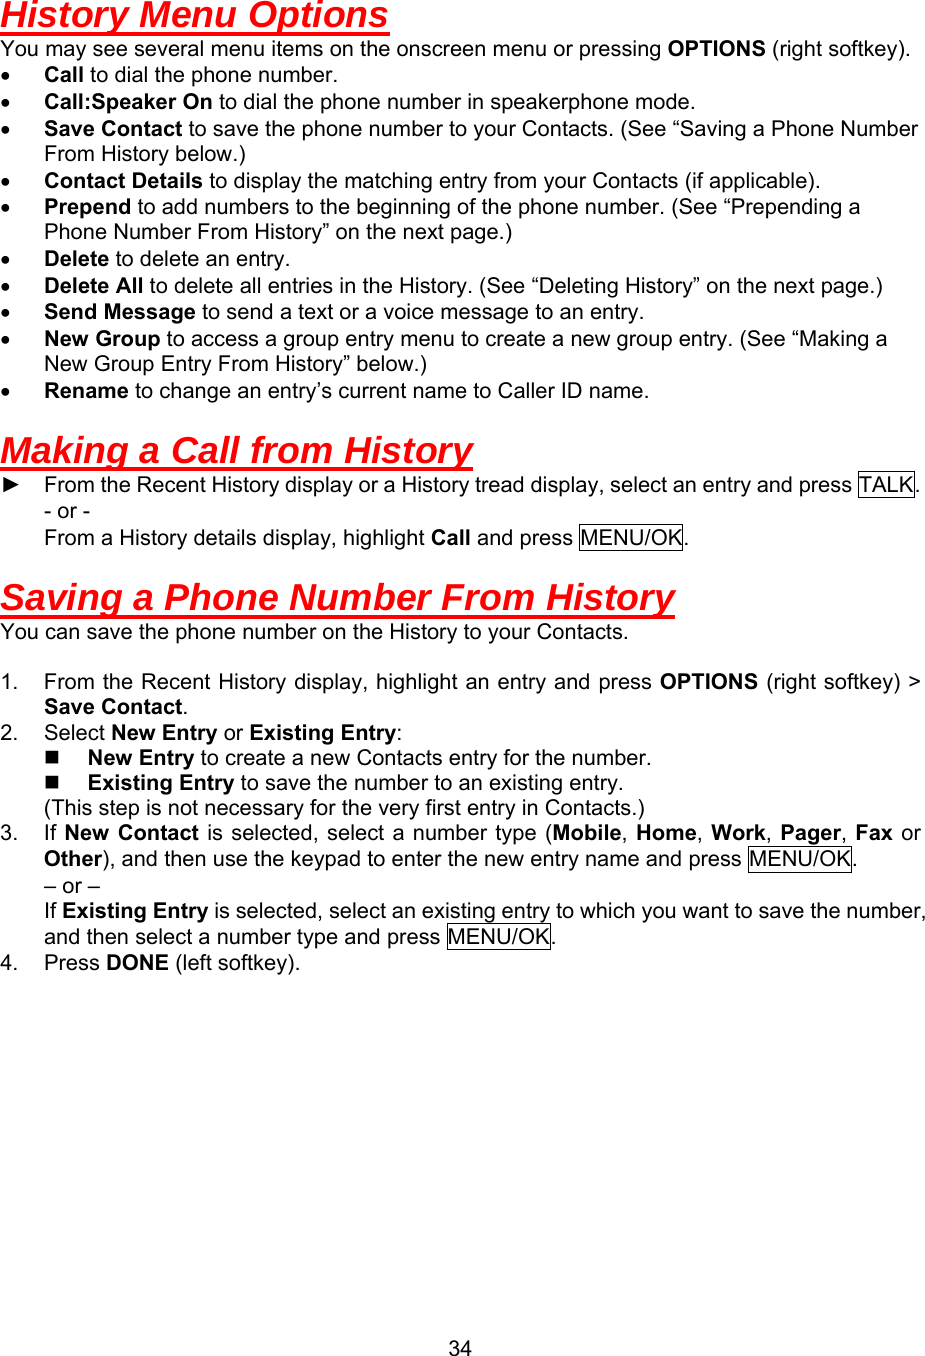  34History Menu Options You may see several menu items on the onscreen menu or pressing OPTIONS (right softkey). •  Call to dial the phone number. •  Call:Speaker On to dial the phone number in speakerphone mode. •  Save Contact to save the phone number to your Contacts. (See “Saving a Phone Number From History below.) •  Contact Details to display the matching entry from your Contacts (if applicable). •  Prepend to add numbers to the beginning of the phone number. (See “Prepending a Phone Number From History” on the next page.)                                                      •  Delete to delete an entry. •  Delete All to delete all entries in the History. (See “Deleting History” on the next page.) •  Send Message to send a text or a voice message to an entry. •  New Group to access a group entry menu to create a new group entry. (See “Making a New Group Entry From History” below.) •  Rename to change an entry’s current name to Caller ID name.  Making a Call from History ► From the Recent History display or a History tread display, select an entry and press TALK. - or - From a History details display, highlight Call and press MENU/OK.  Saving a Phone Number From History You can save the phone number on the History to your Contacts.  1.  From the Recent History display, highlight an entry and press OPTIONS (right softkey) &gt; Save Contact. 2. Select New Entry or Existing Entry:   New Entry to create a new Contacts entry for the number.   Existing Entry to save the number to an existing entry.   (This step is not necessary for the very first entry in Contacts.) 3. If New Contact is selected, select a number type (Mobile, Home,  Work, Pager,  Fax or Other), and then use the keypad to enter the new entry name and press MENU/OK.     – or –     If Existing Entry is selected, select an existing entry to which you want to save the number, and then select a number type and press MENU/OK. 4. Press DONE (left softkey).  